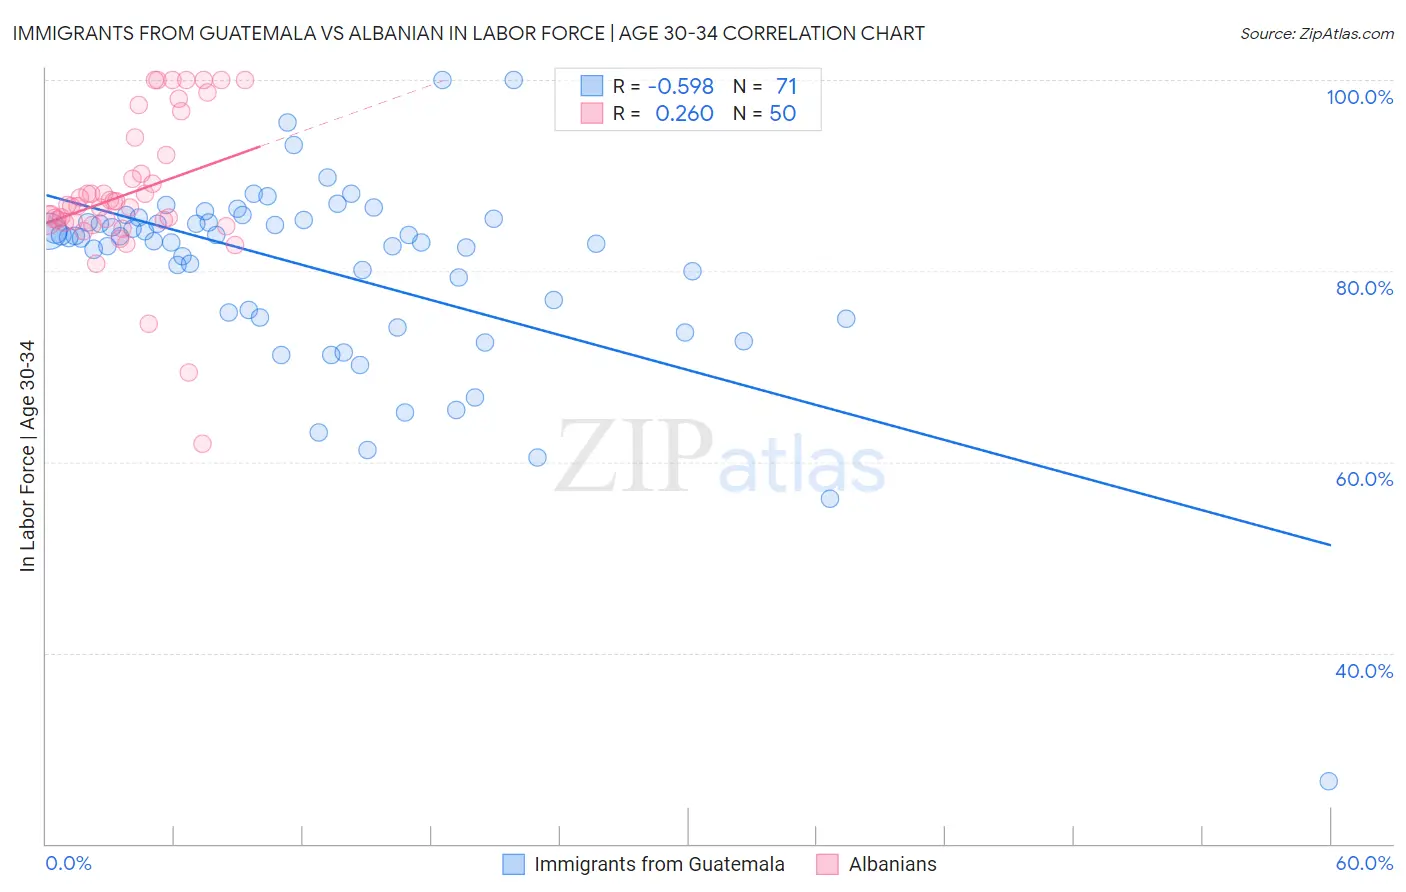 Immigrants from Guatemala vs Albanian In Labor Force | Age 30-34